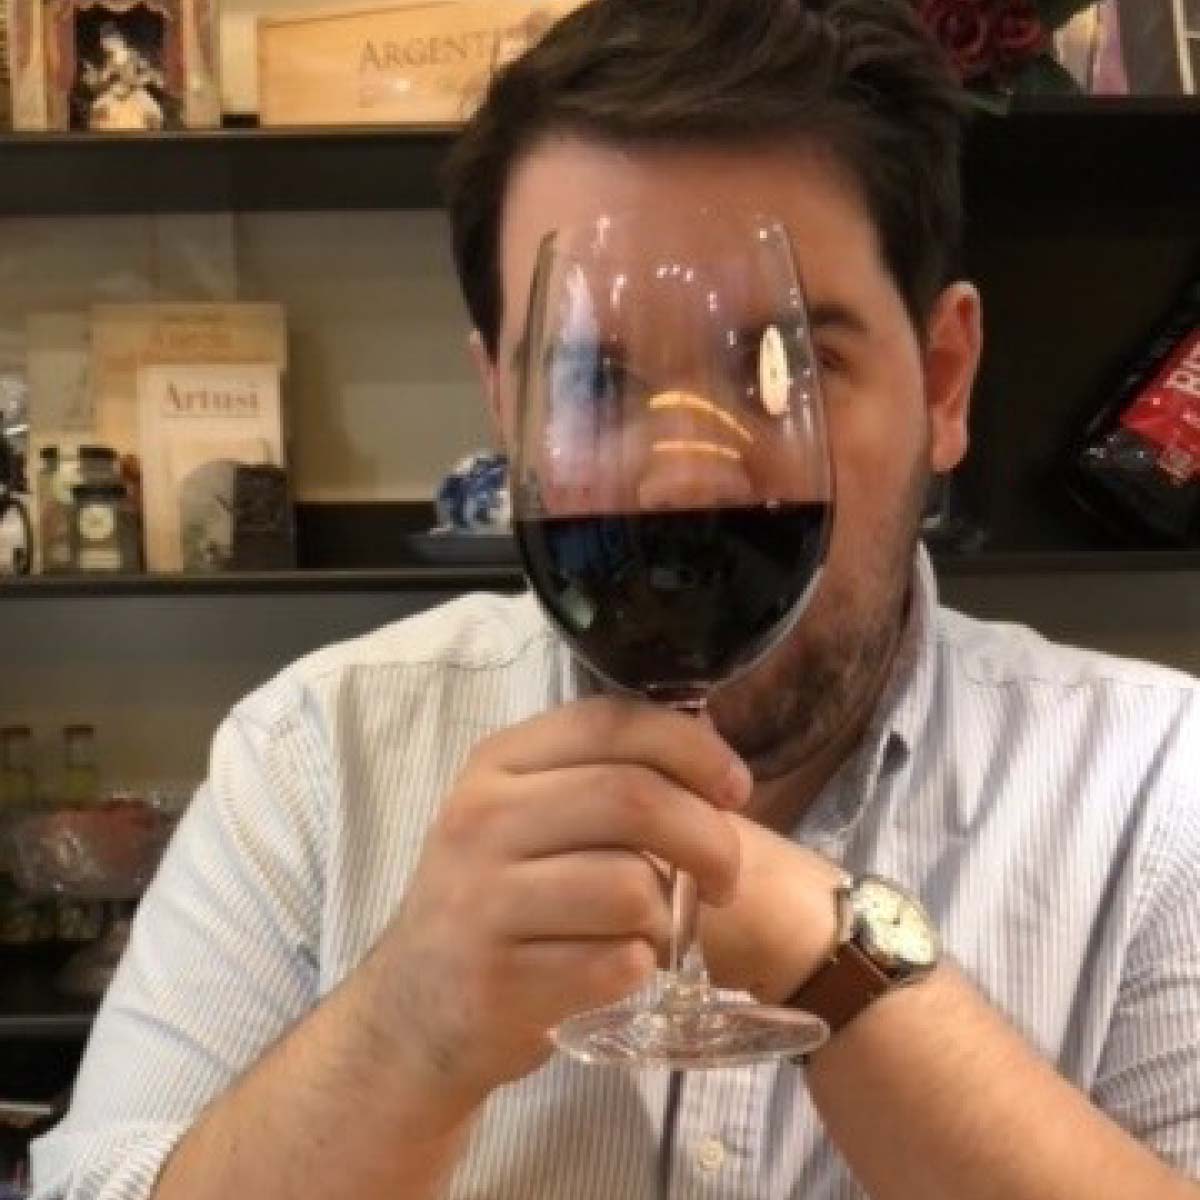 Parker James. Man with wine glass in front of his face